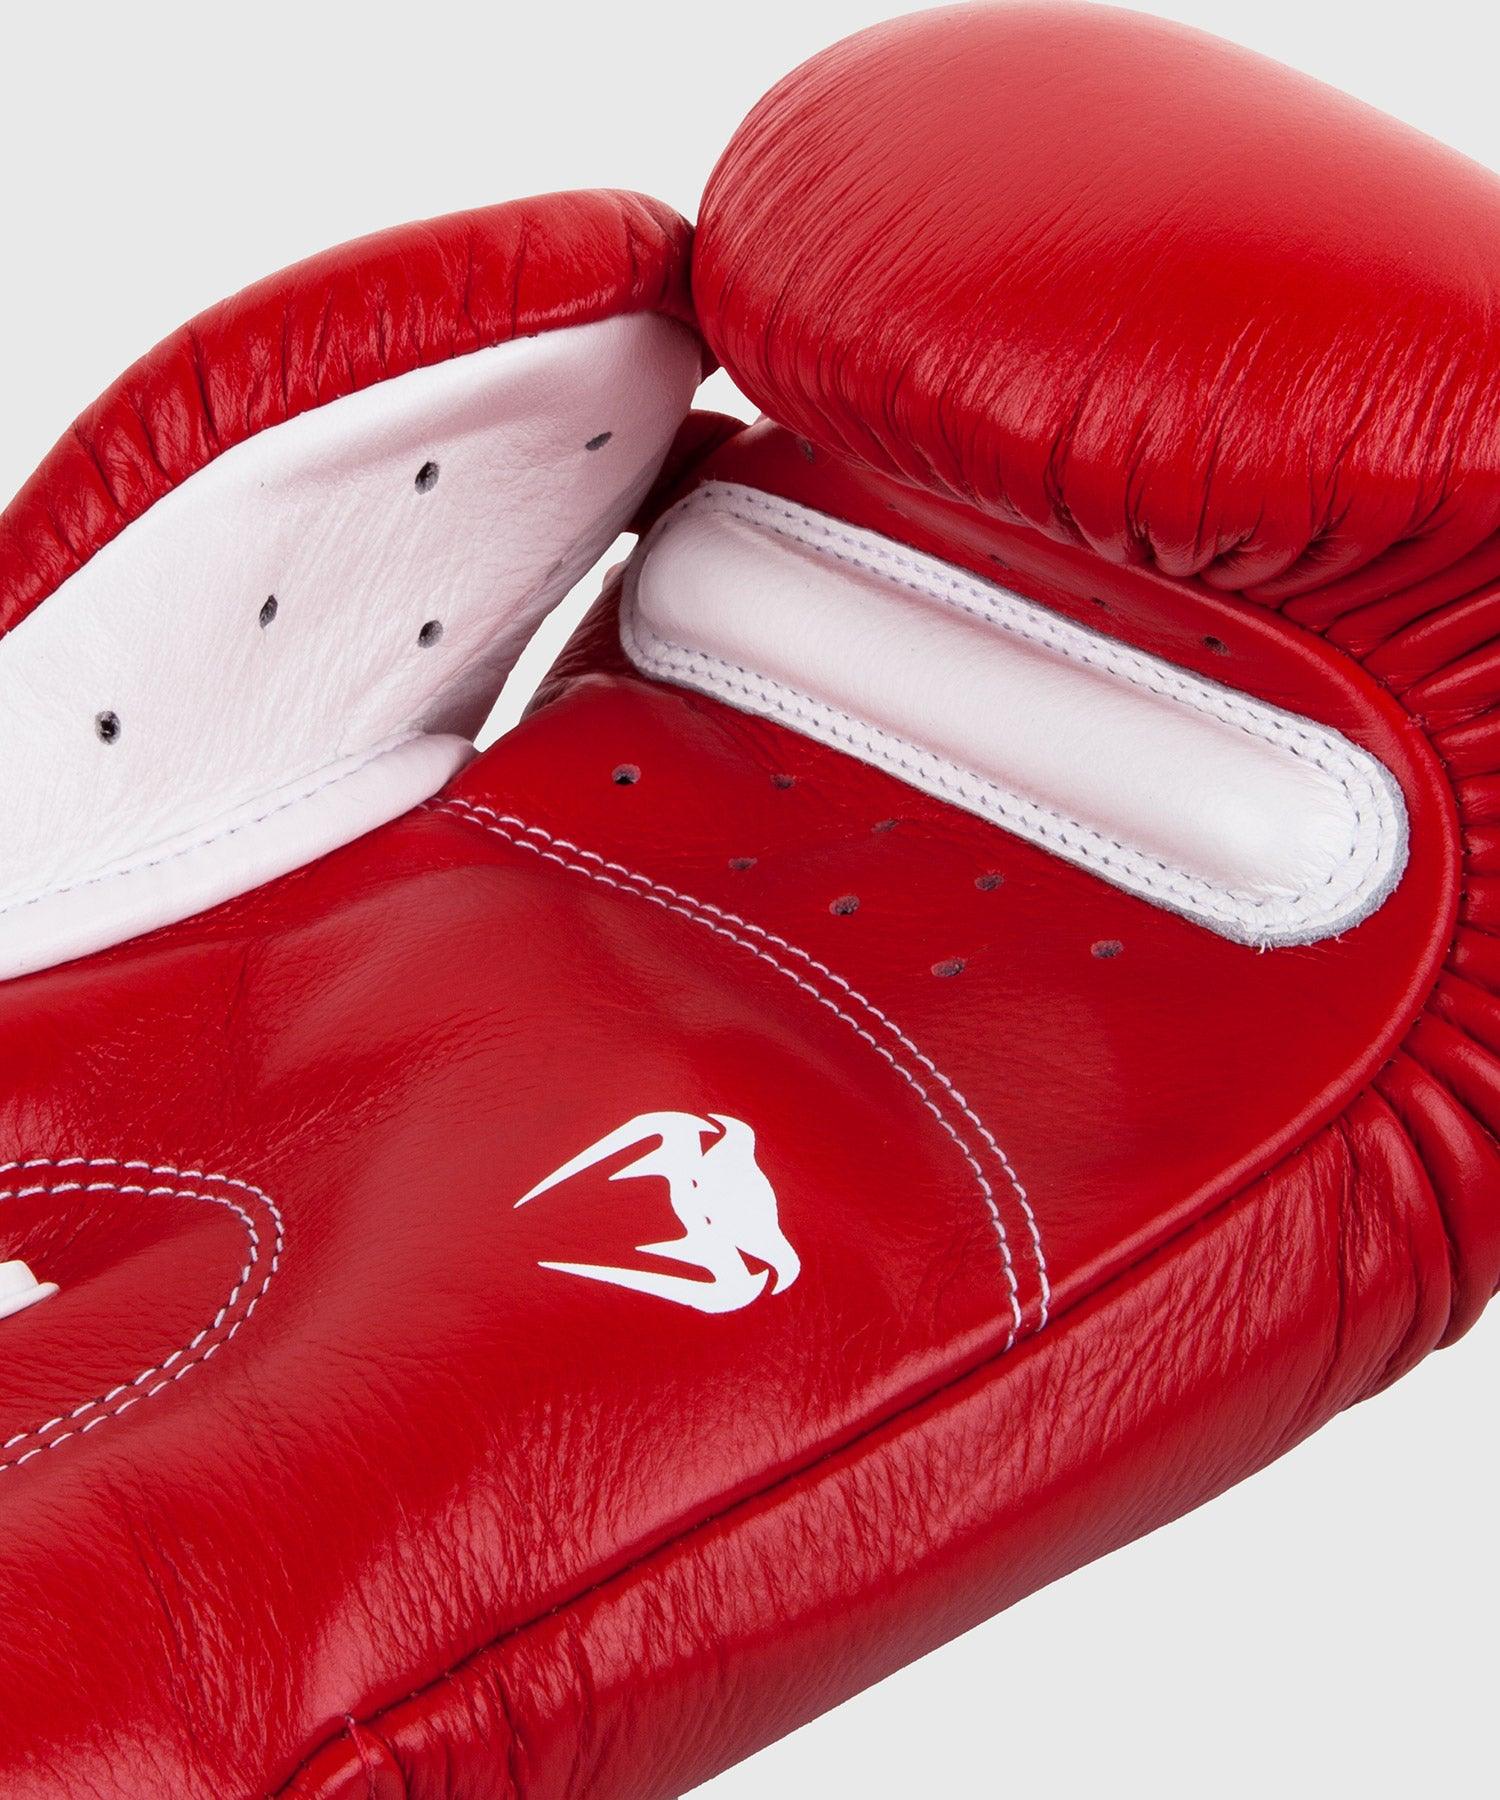 Venum Giant 3.0 Boxing Gloves - Nappa Leather - Red Picture 4